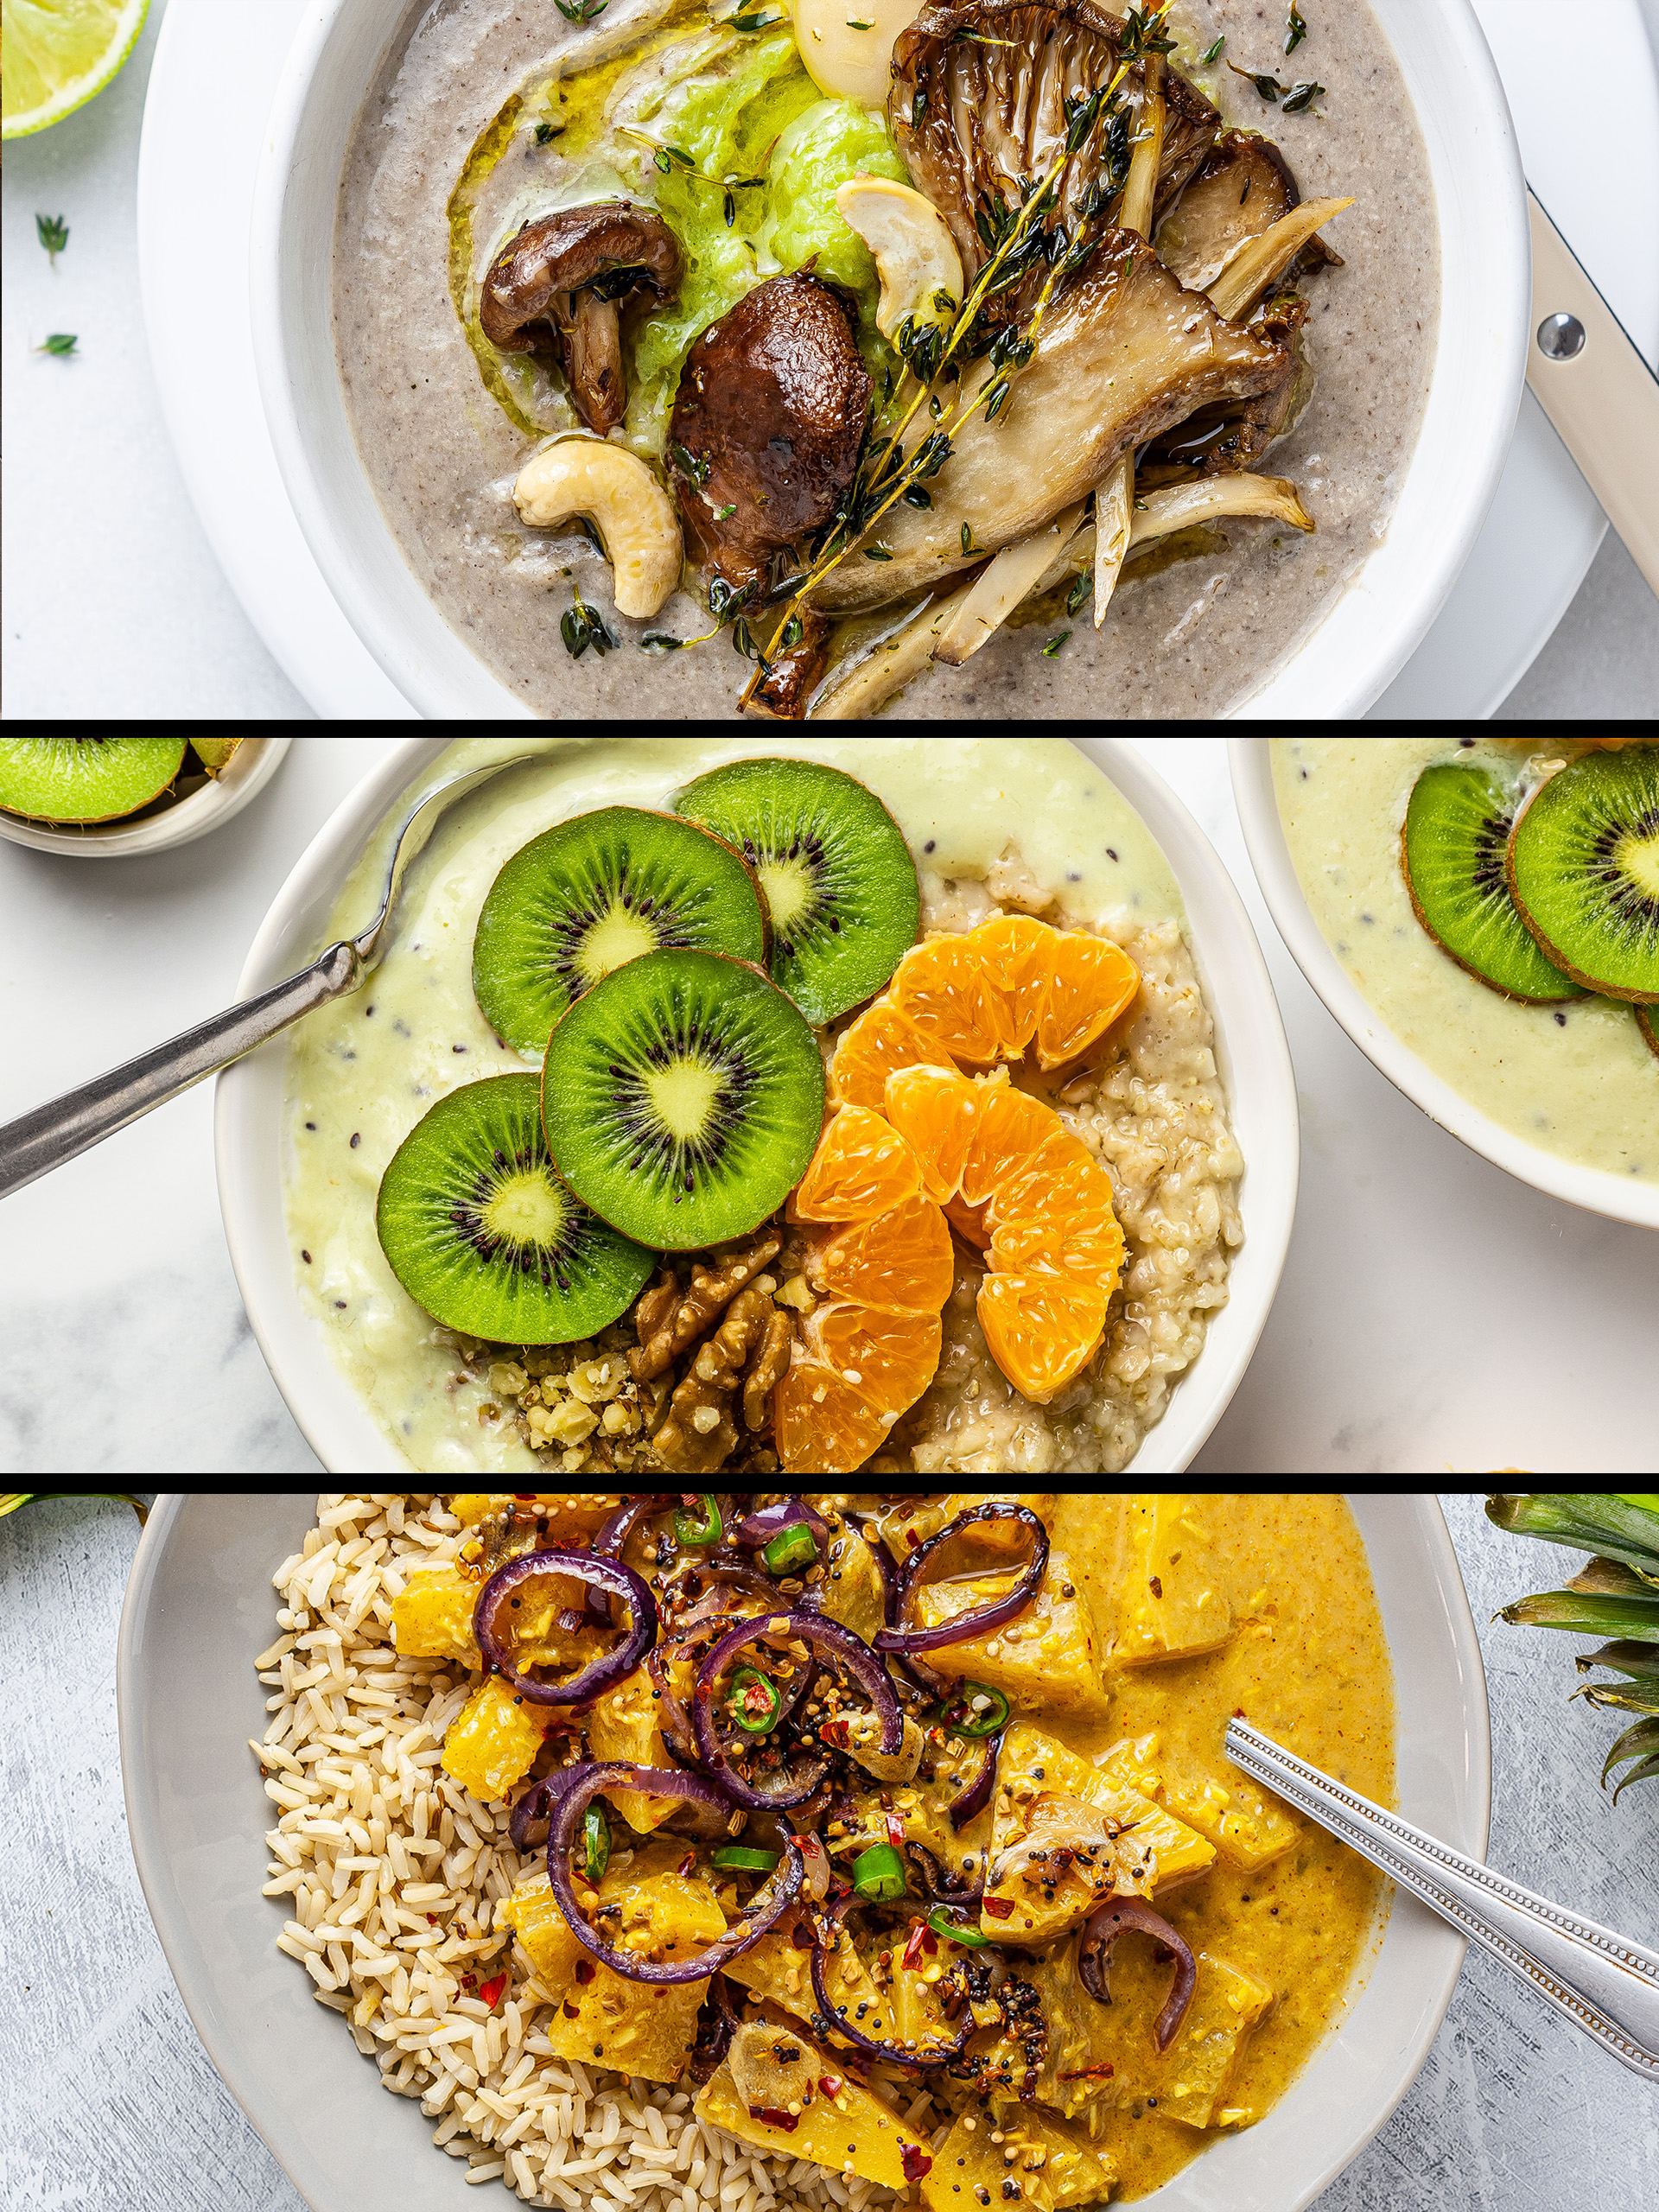 8 Healthy Seasonal Recipes to Make This March